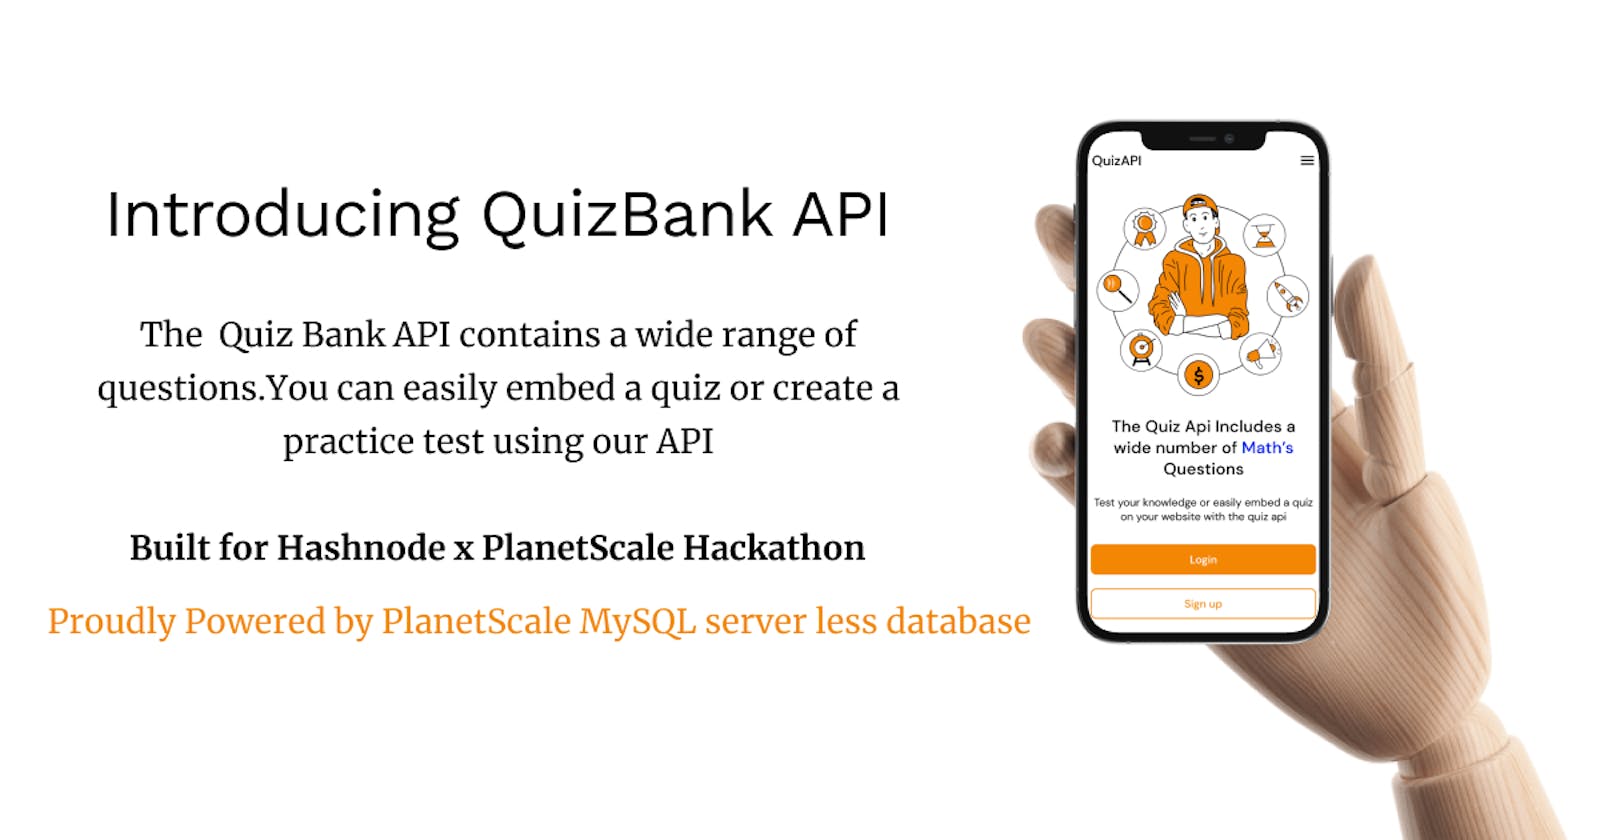 Introducing QuizBank API: Easily embed a quiz or create a practice test using our API.